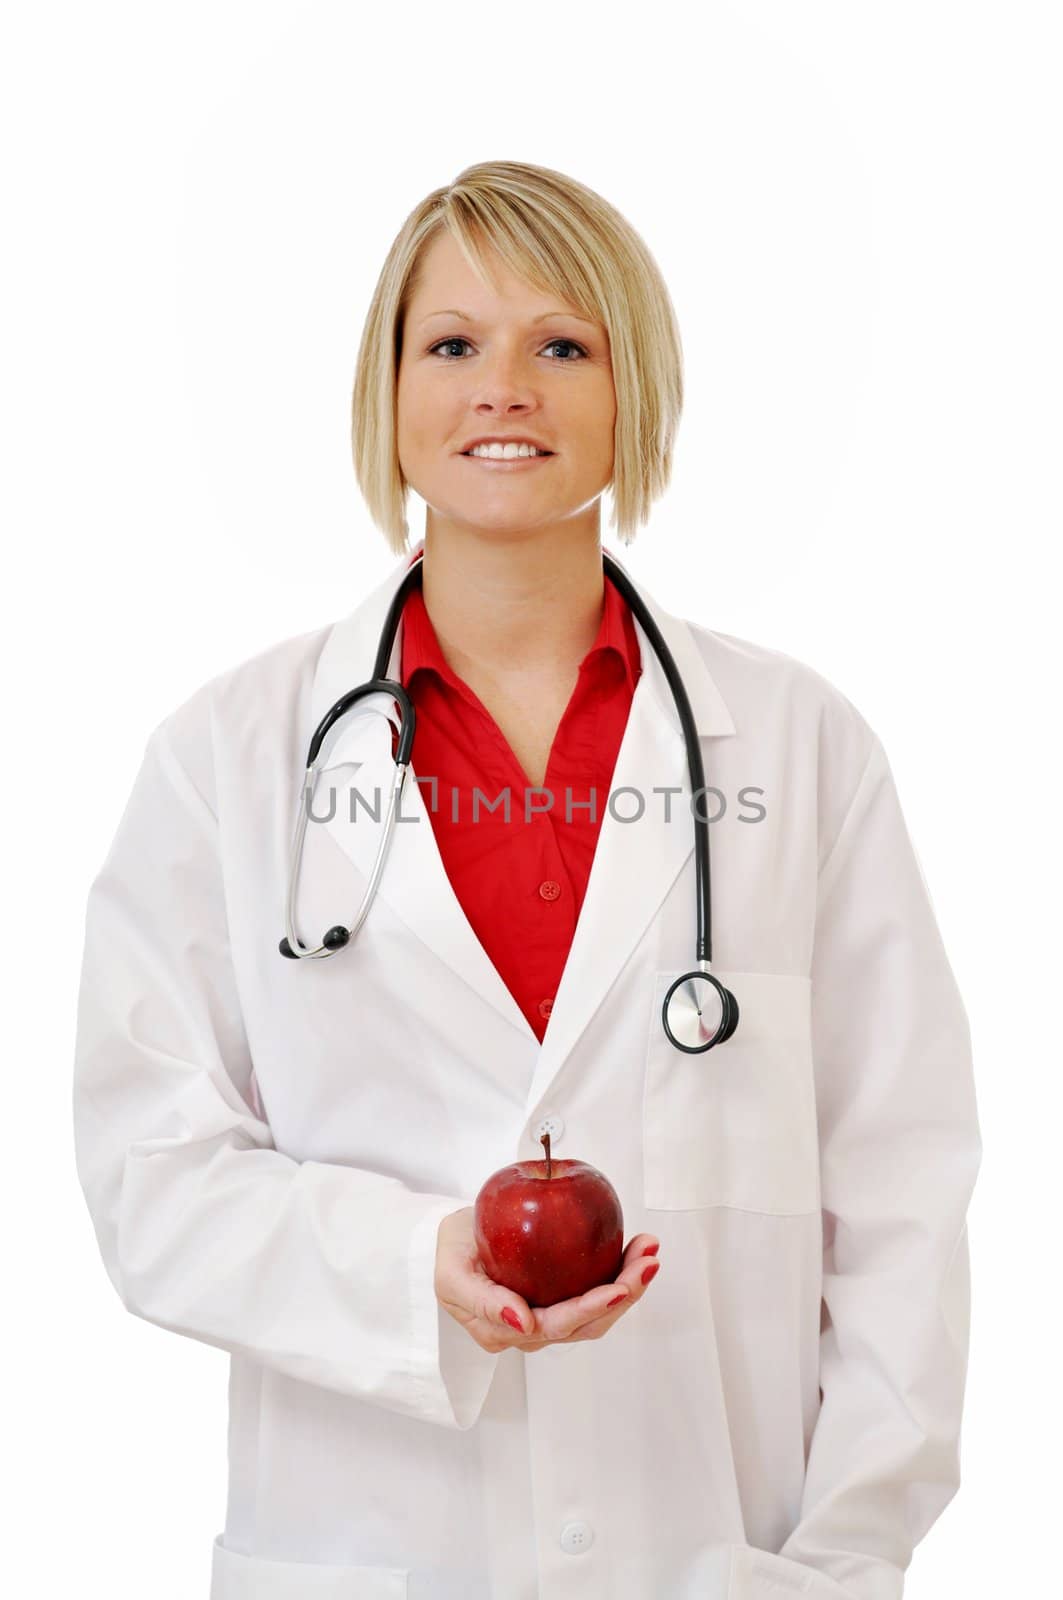 Female doctor with apple and stethoscope isolated on white background.